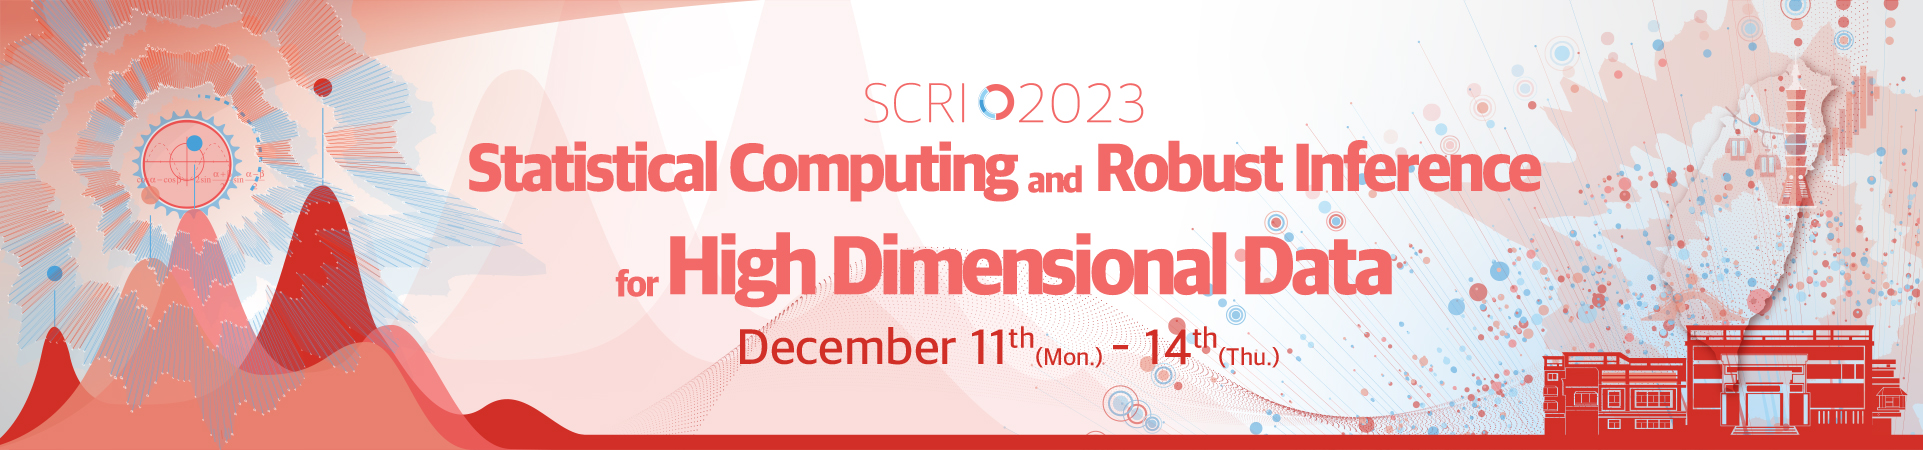 2023Statistical Computing And Robust Inference For High Dimensional Data